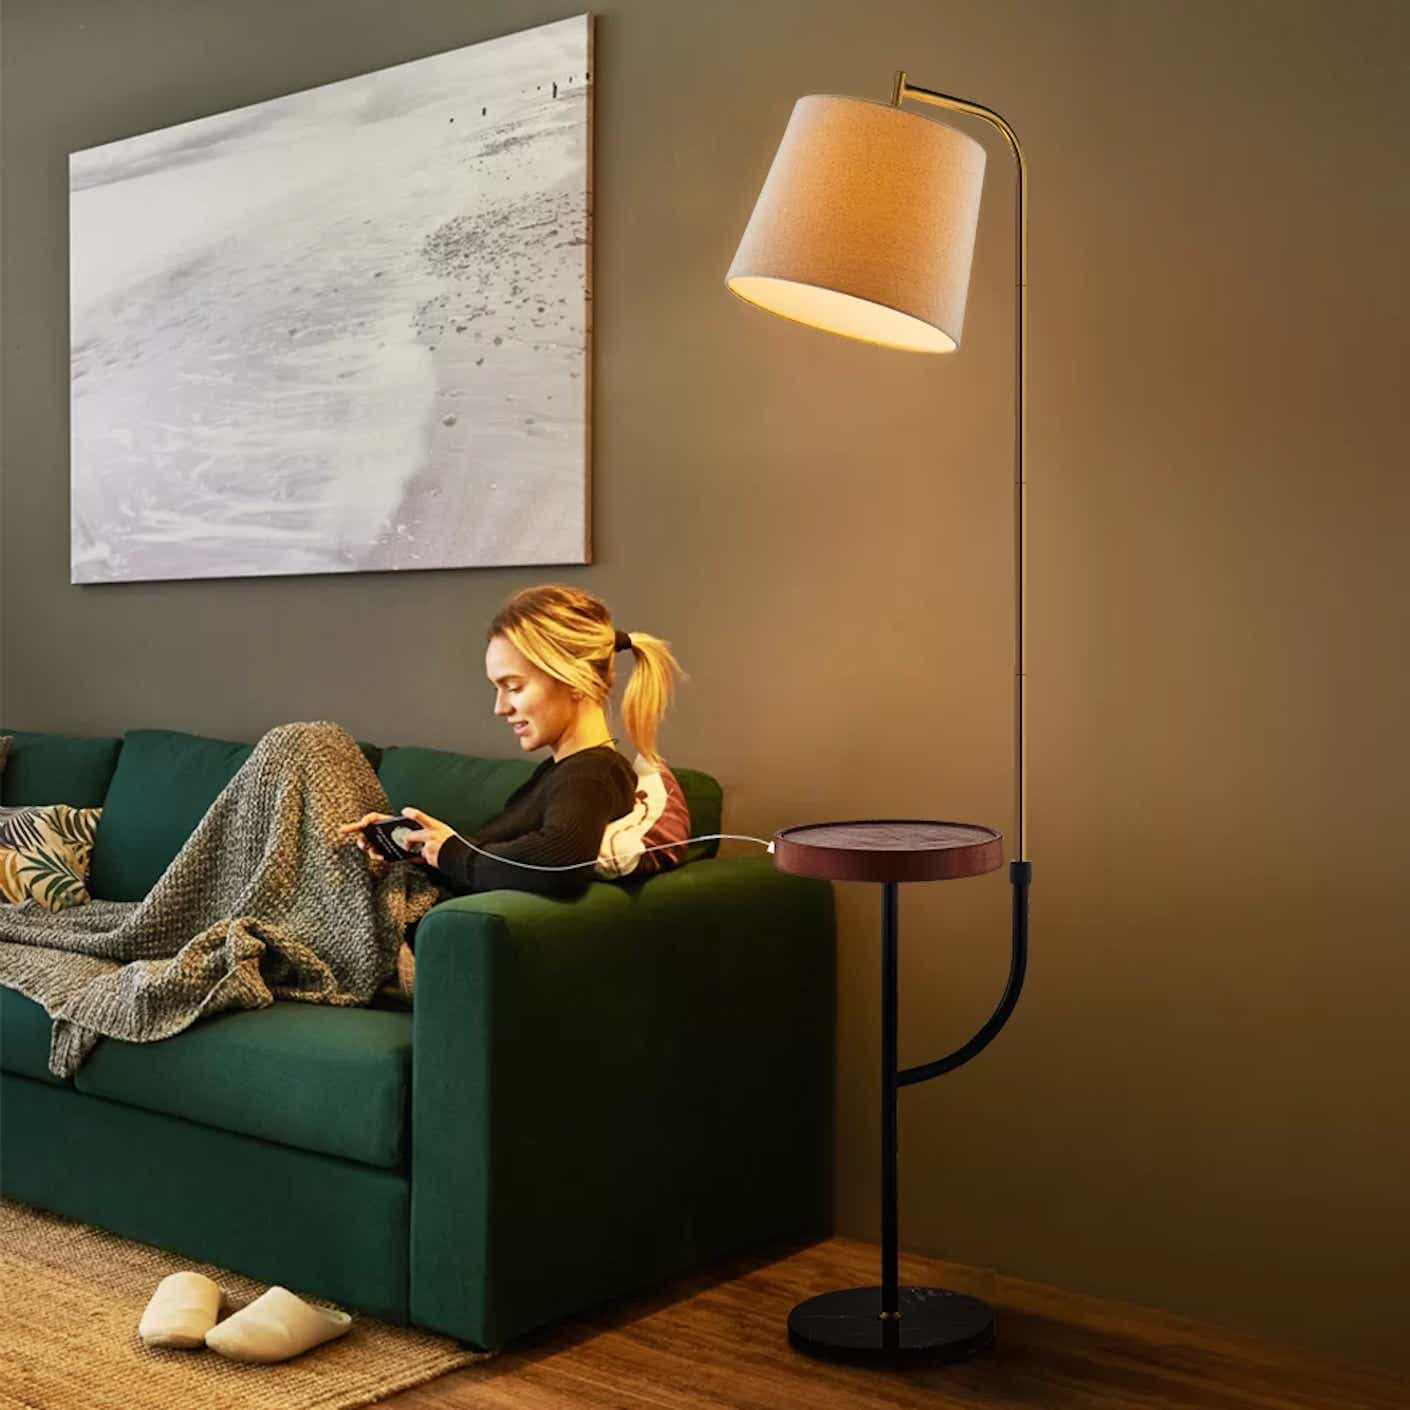 A floor lamp with attached circular tray is shown warmly illuminating a living room space.